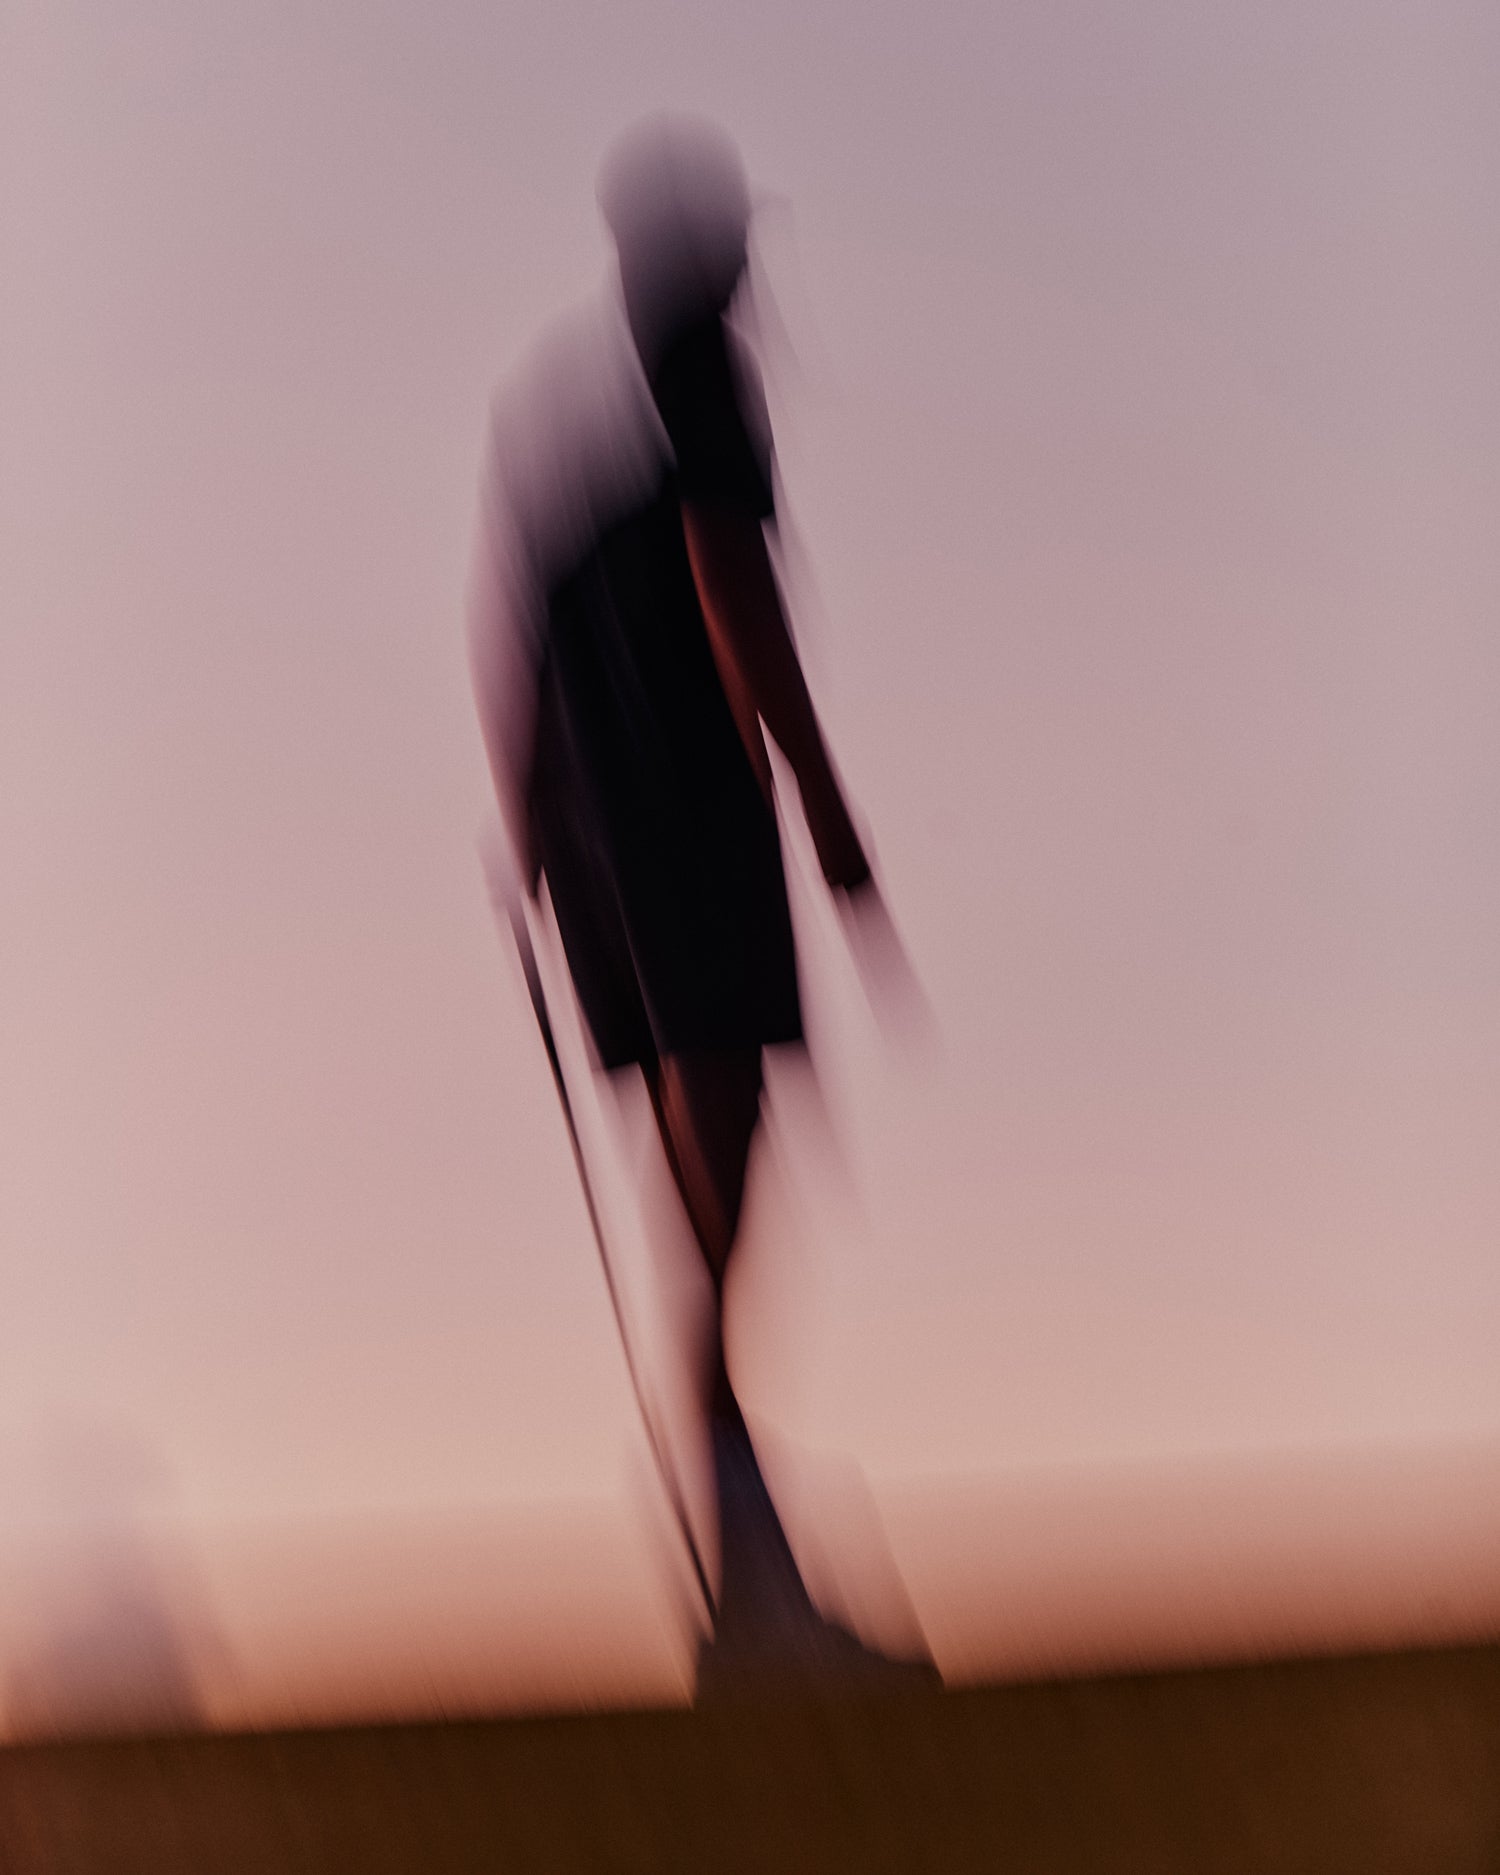 Abstract blurry golfer standing at the Grove XXIII Golf Club with a red pink skyline